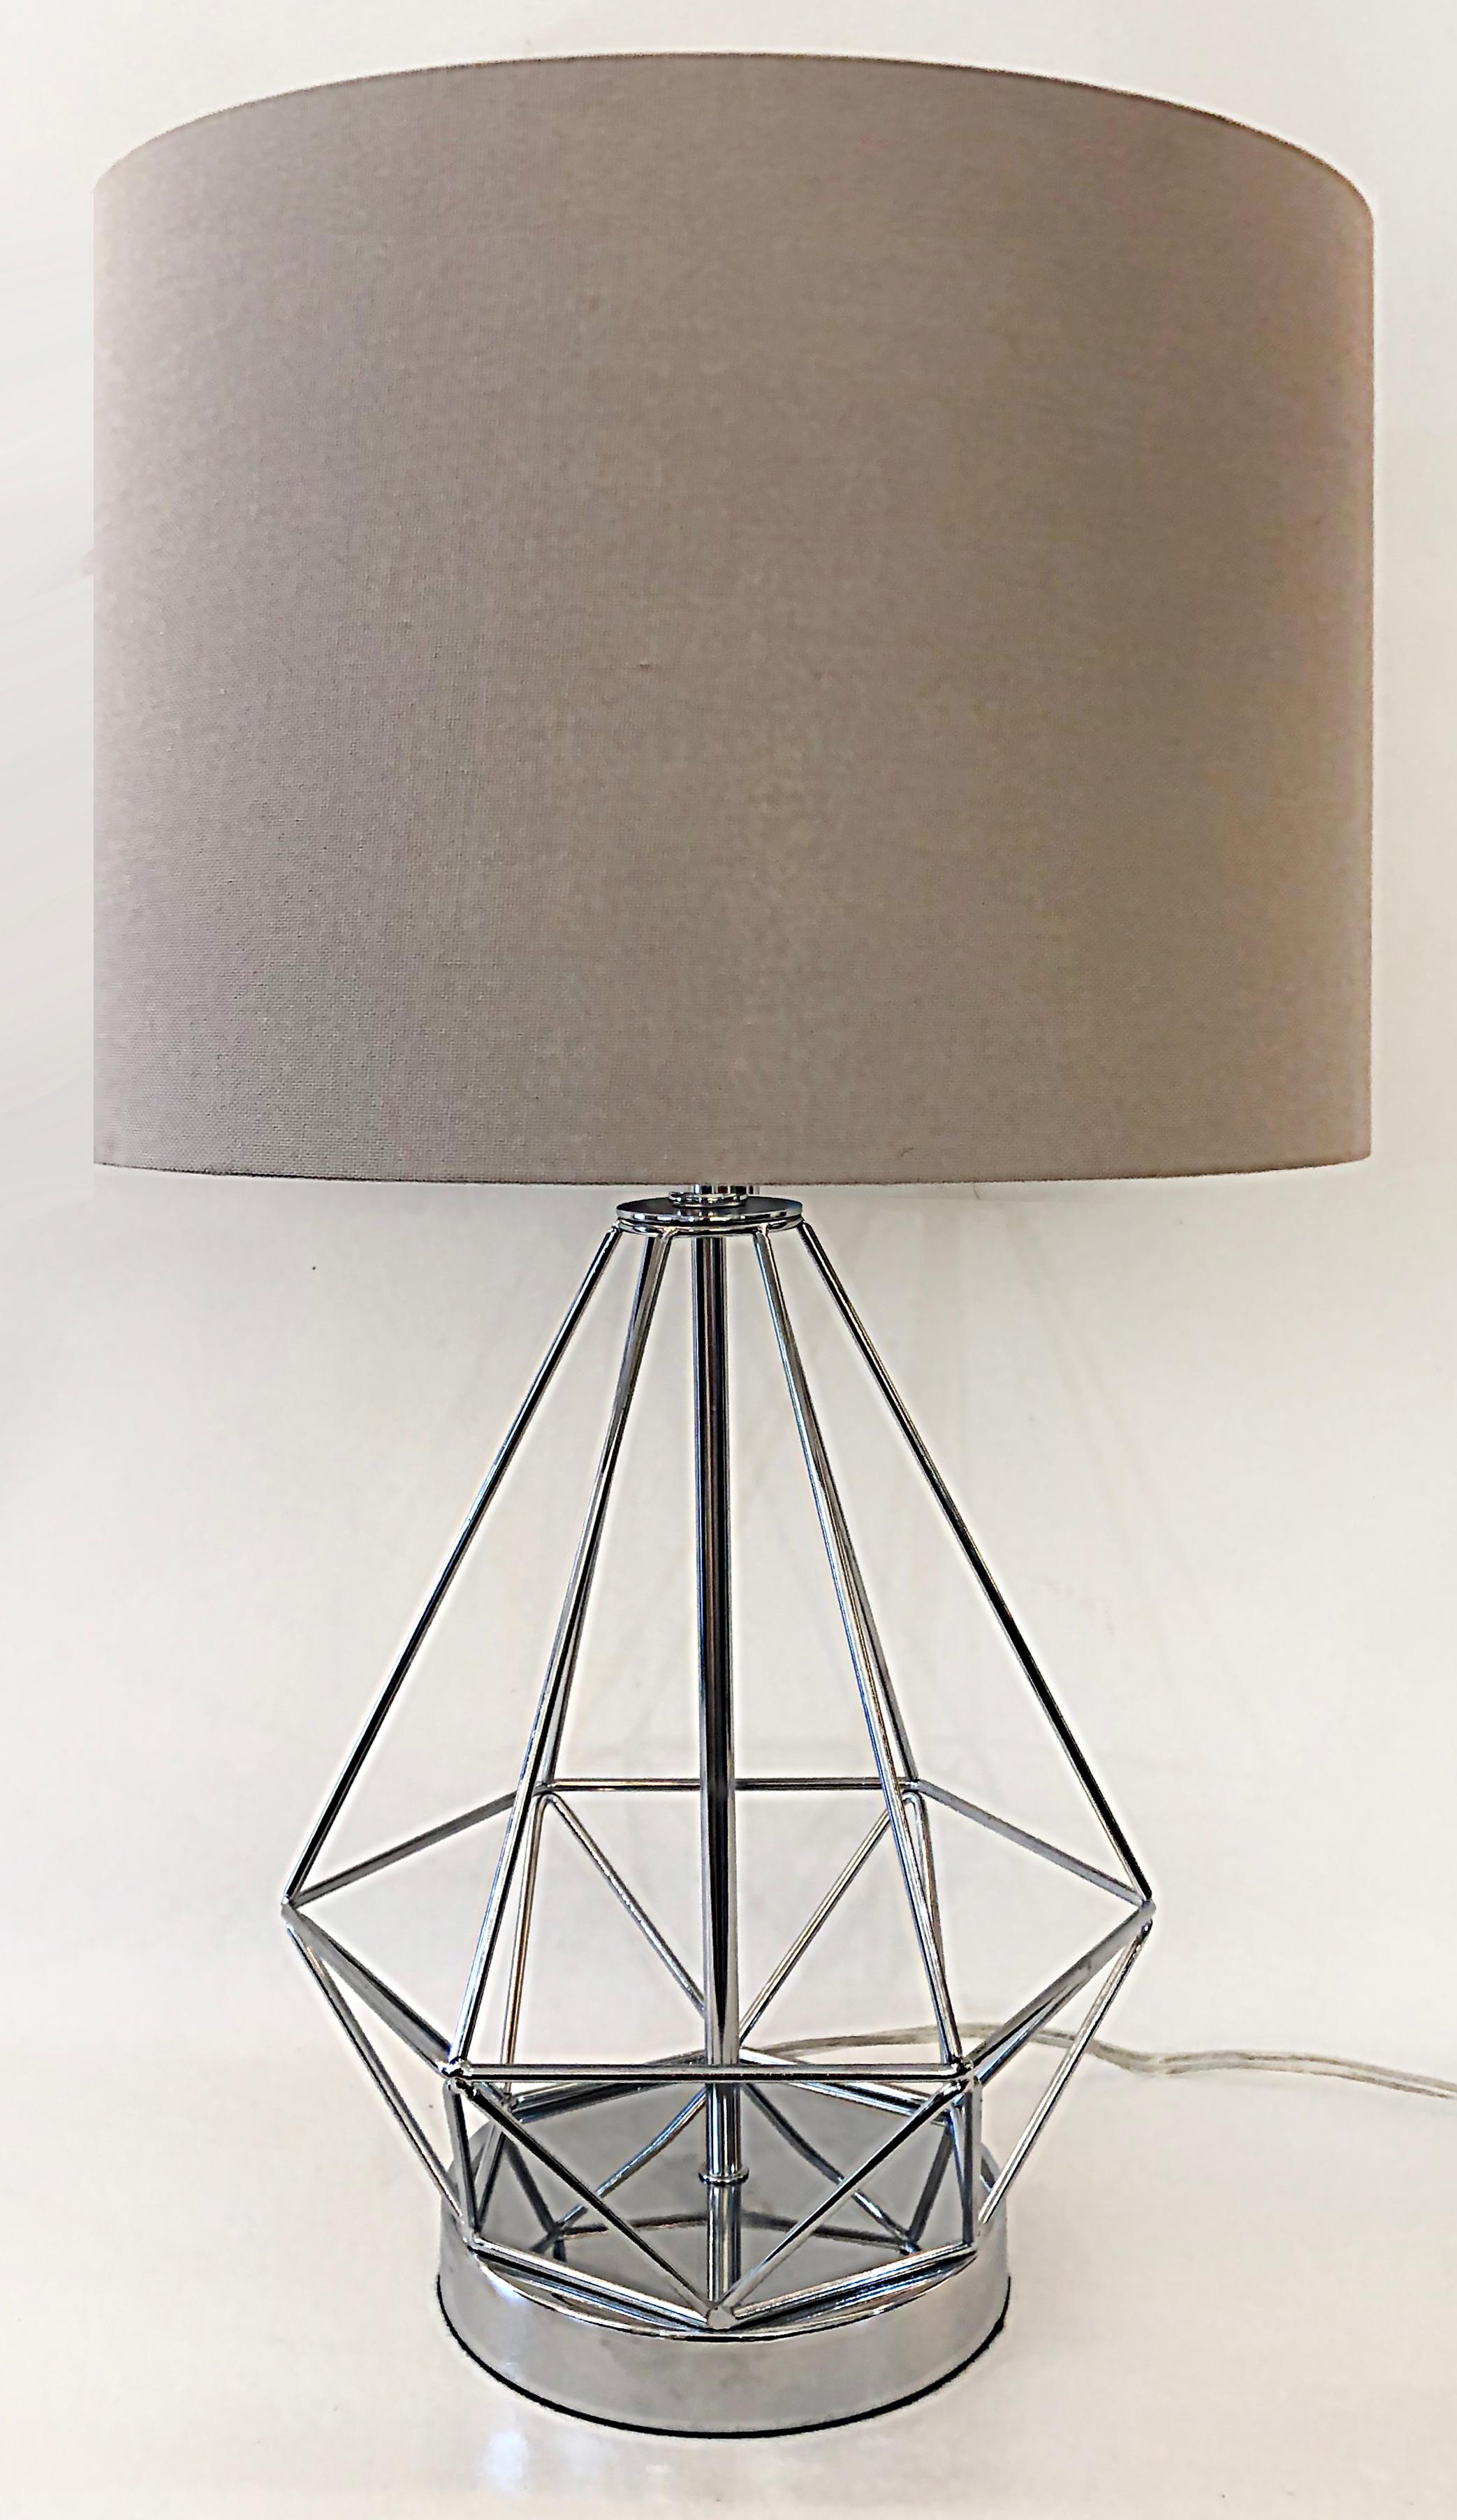 Vintage chrome geometric table lamps, USB charging port on base.

Offered for sale is a vintage pair of chrome geometric form table lamps with drum shades included. The lamps have geometric chrome forms supported by round chrome bases. You can see